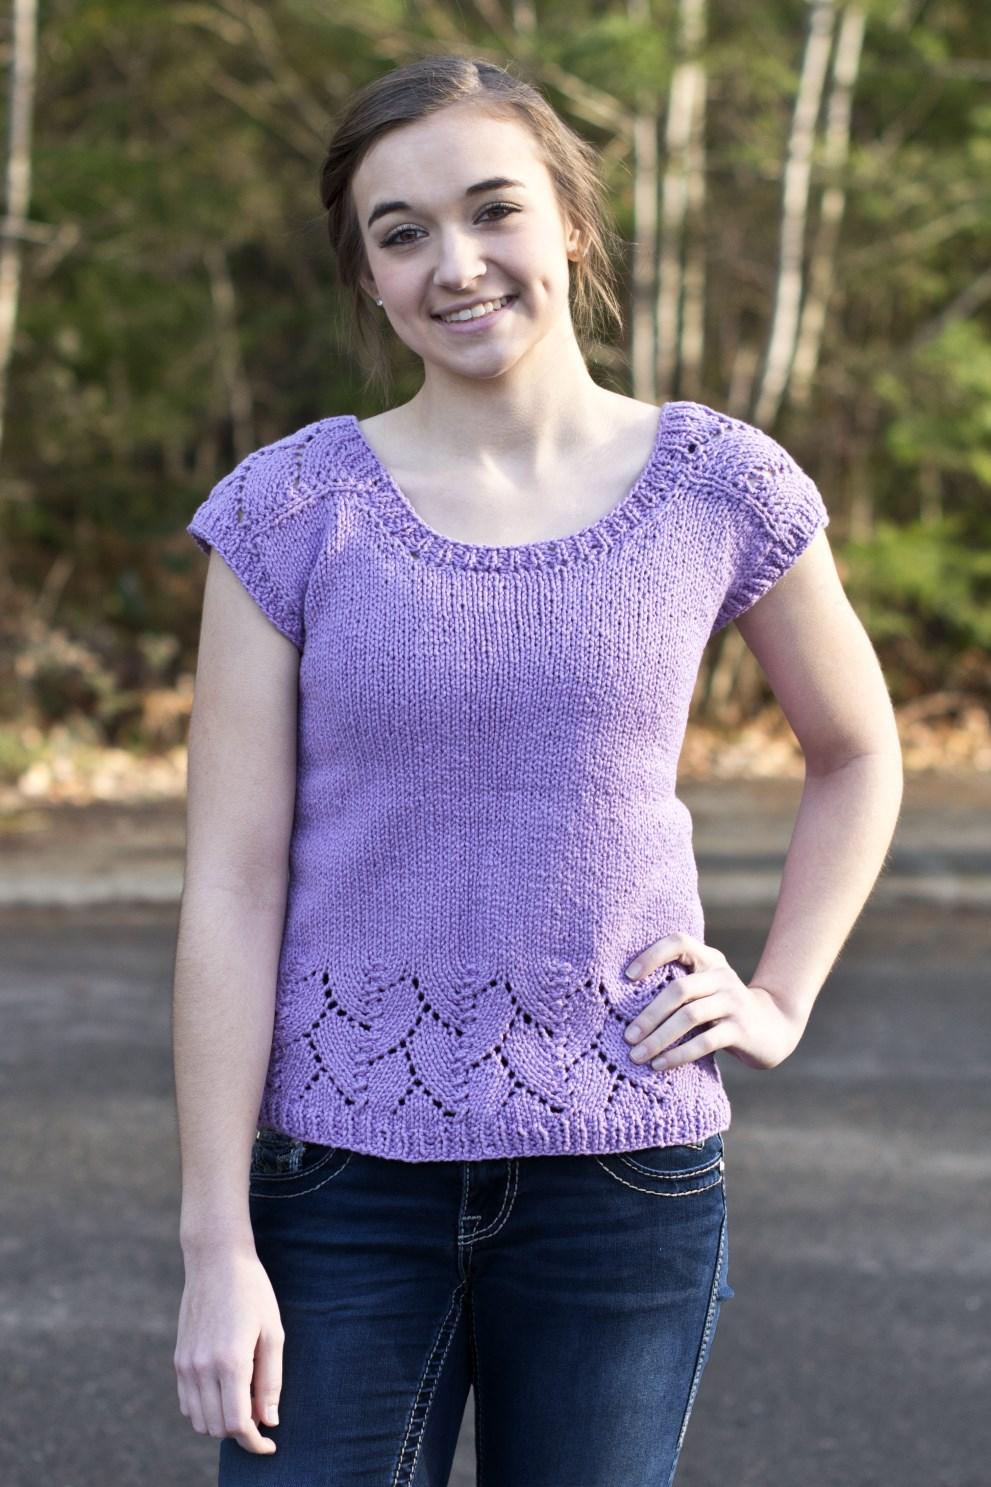 Luna Beachcomber Designed by Julie Gaddy This is the perfect summer sweater for casual dressing or office wear.